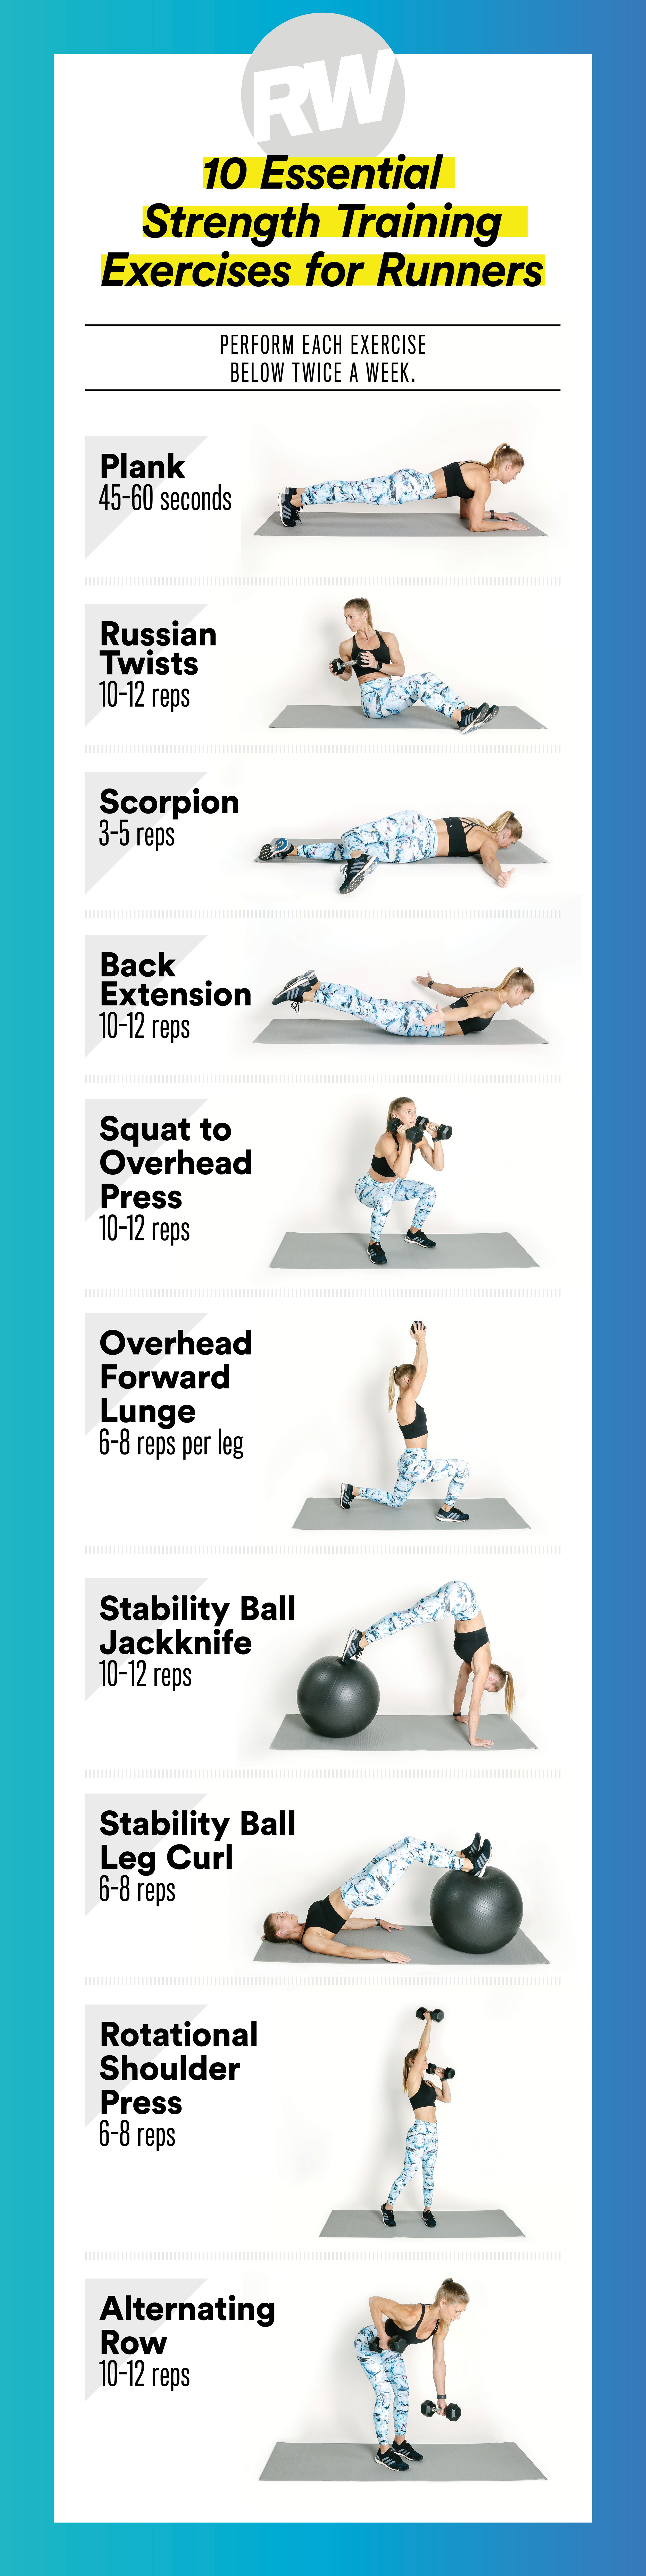 Strength training workouts